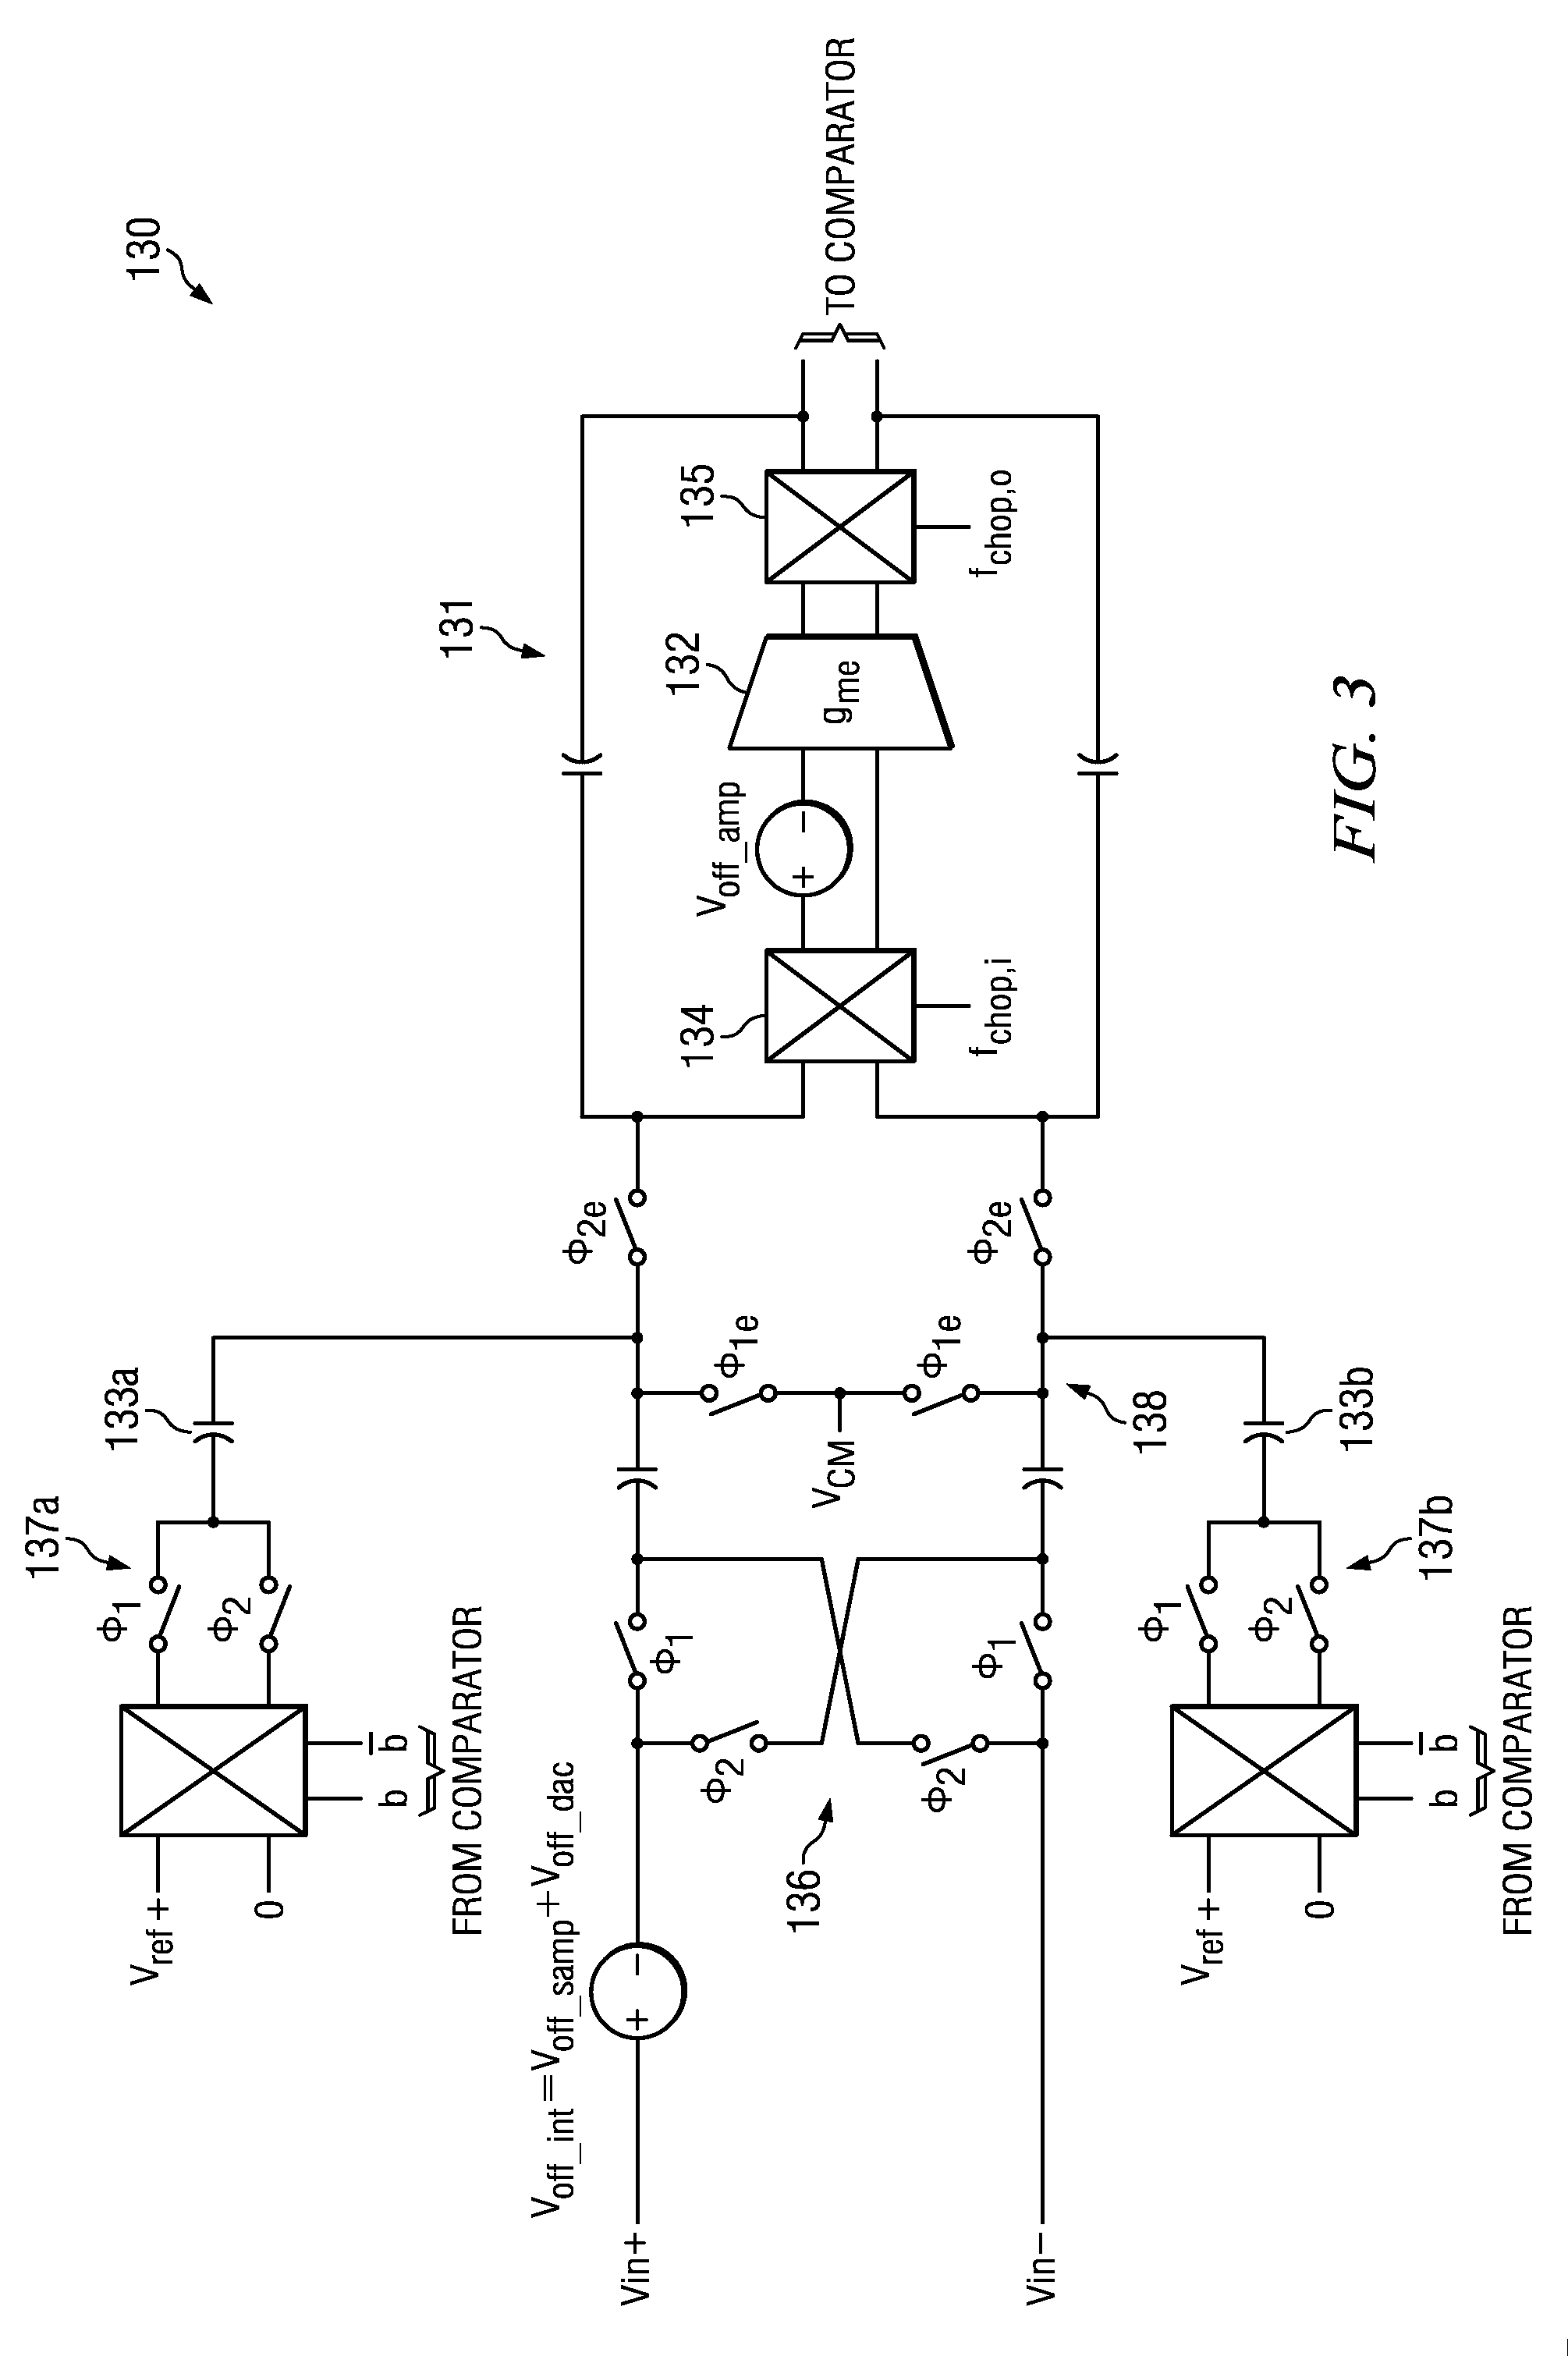 Multistage chopper stabilized delta-sigma ADC with reduced offset